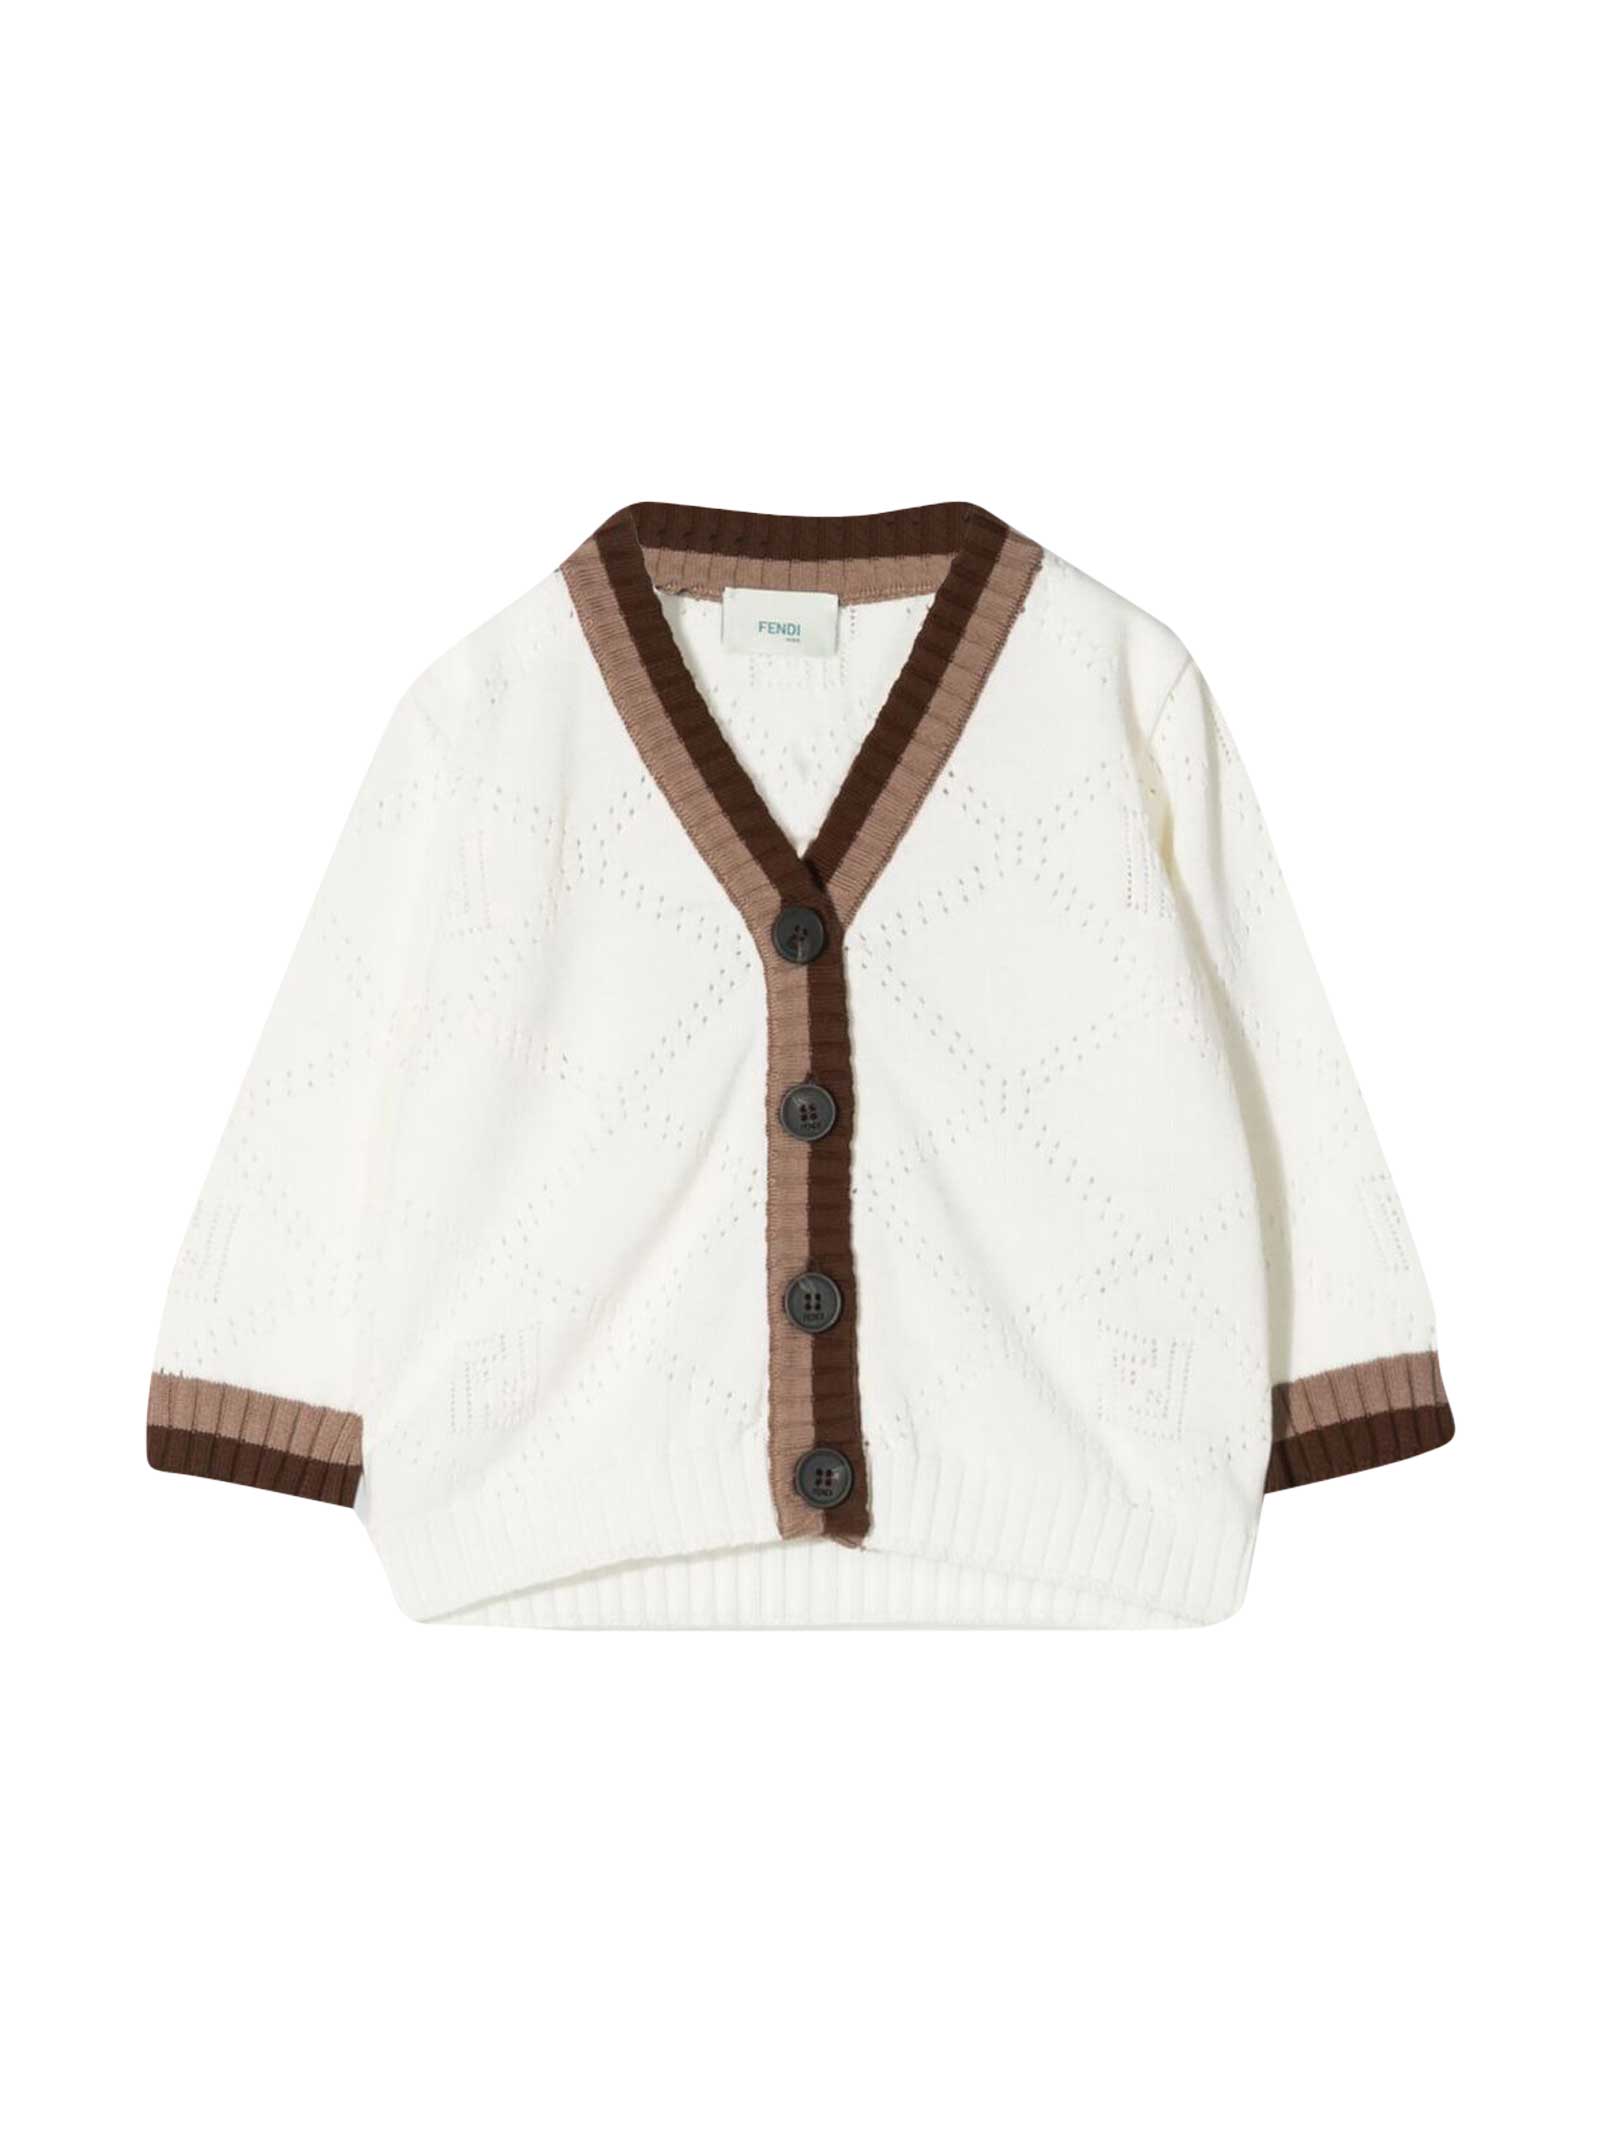 Fendi Babies' White Cardigan With Brown Details In Gesso/tabacco